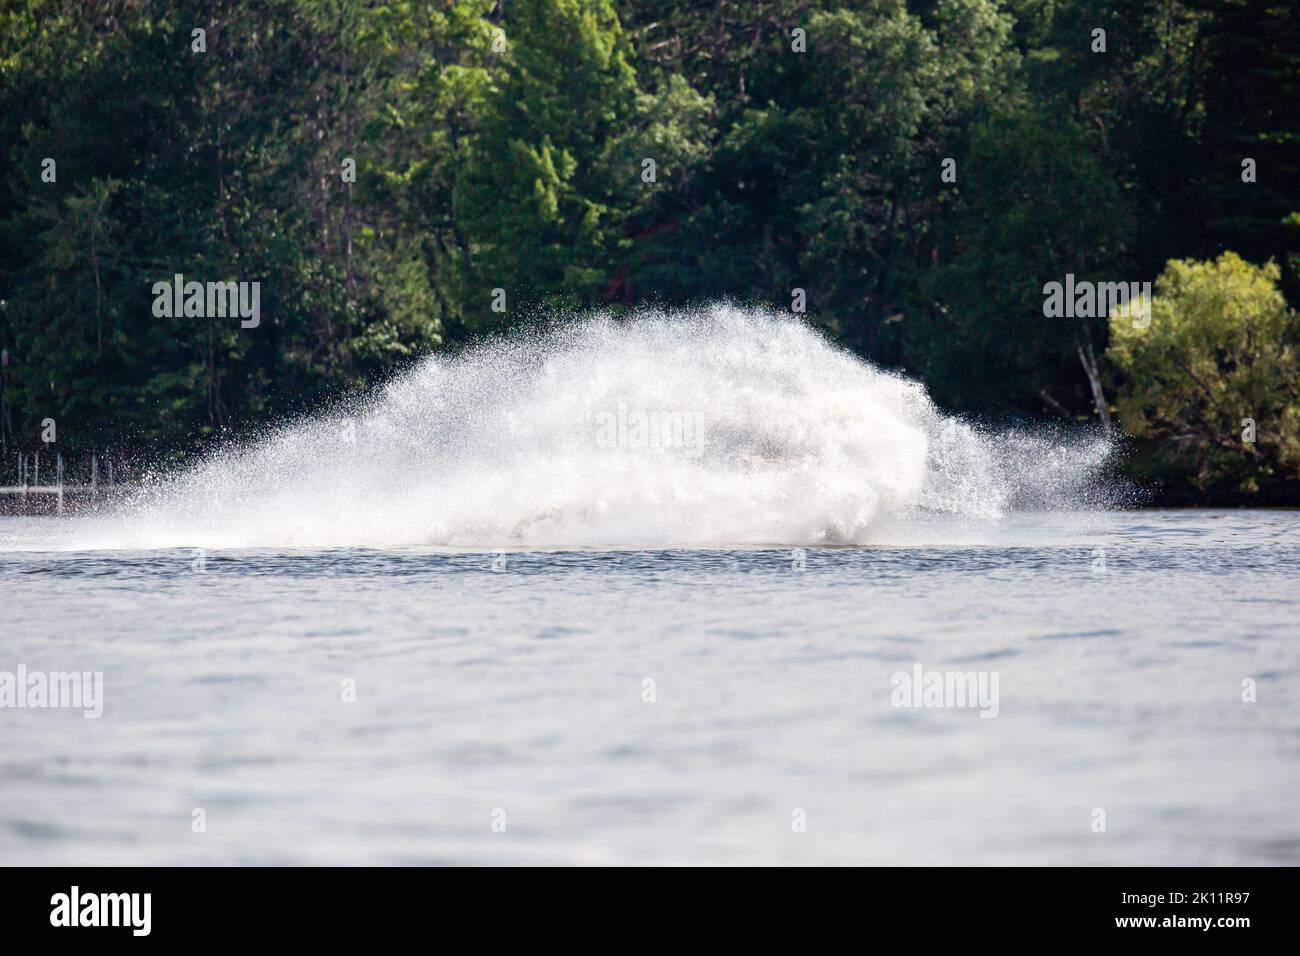 Wave and splash of water is covering the entire jet ski that is making it, horizontal Stock Photo